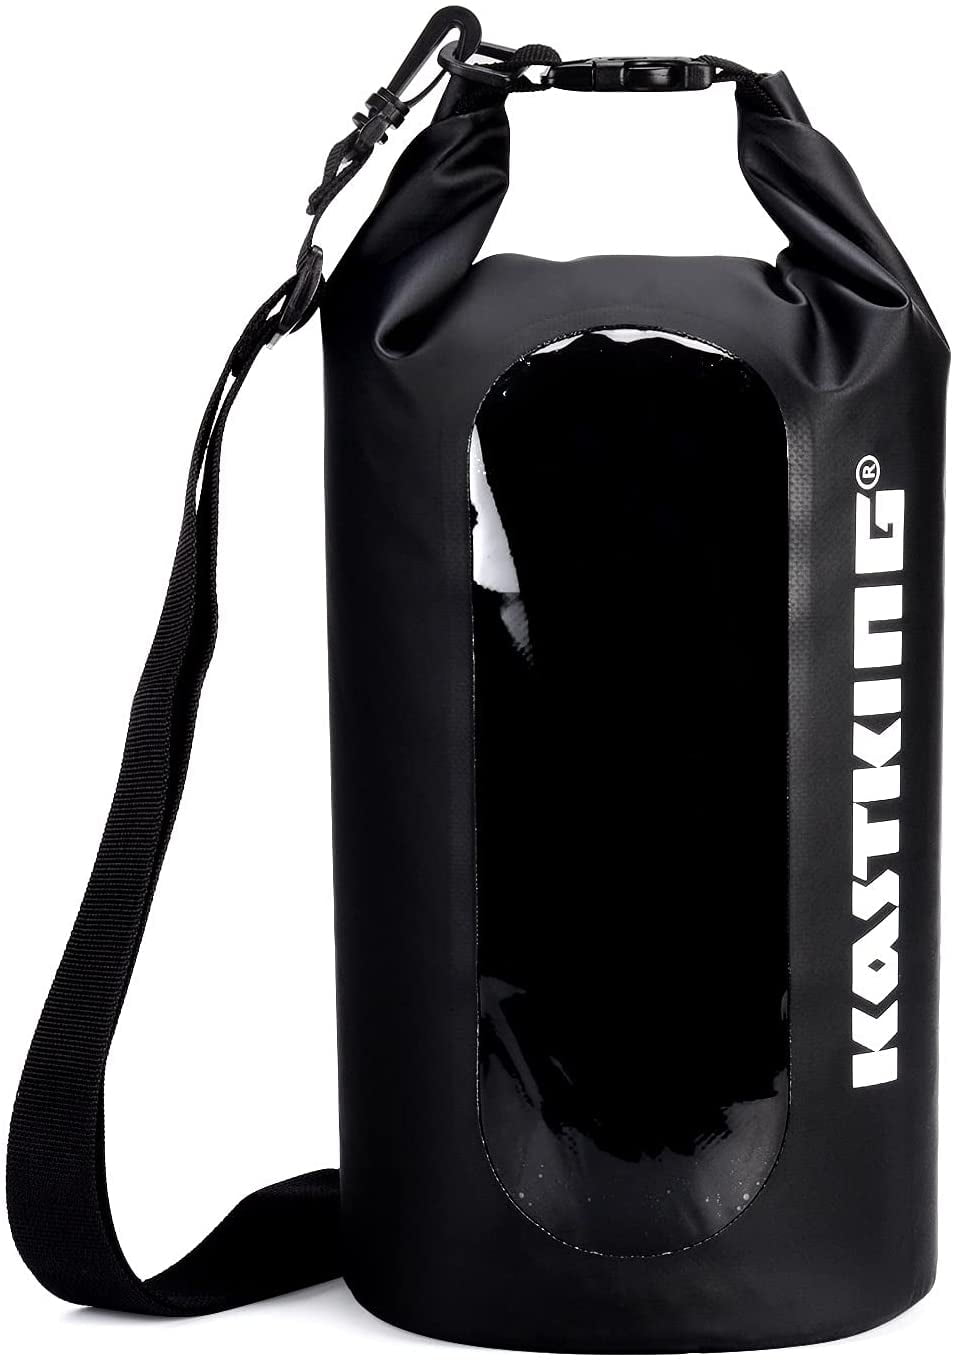 Heavey-Duty PVC Water Proof Dry Bag Sack for Swimming/Camping/Fishing/Boating 